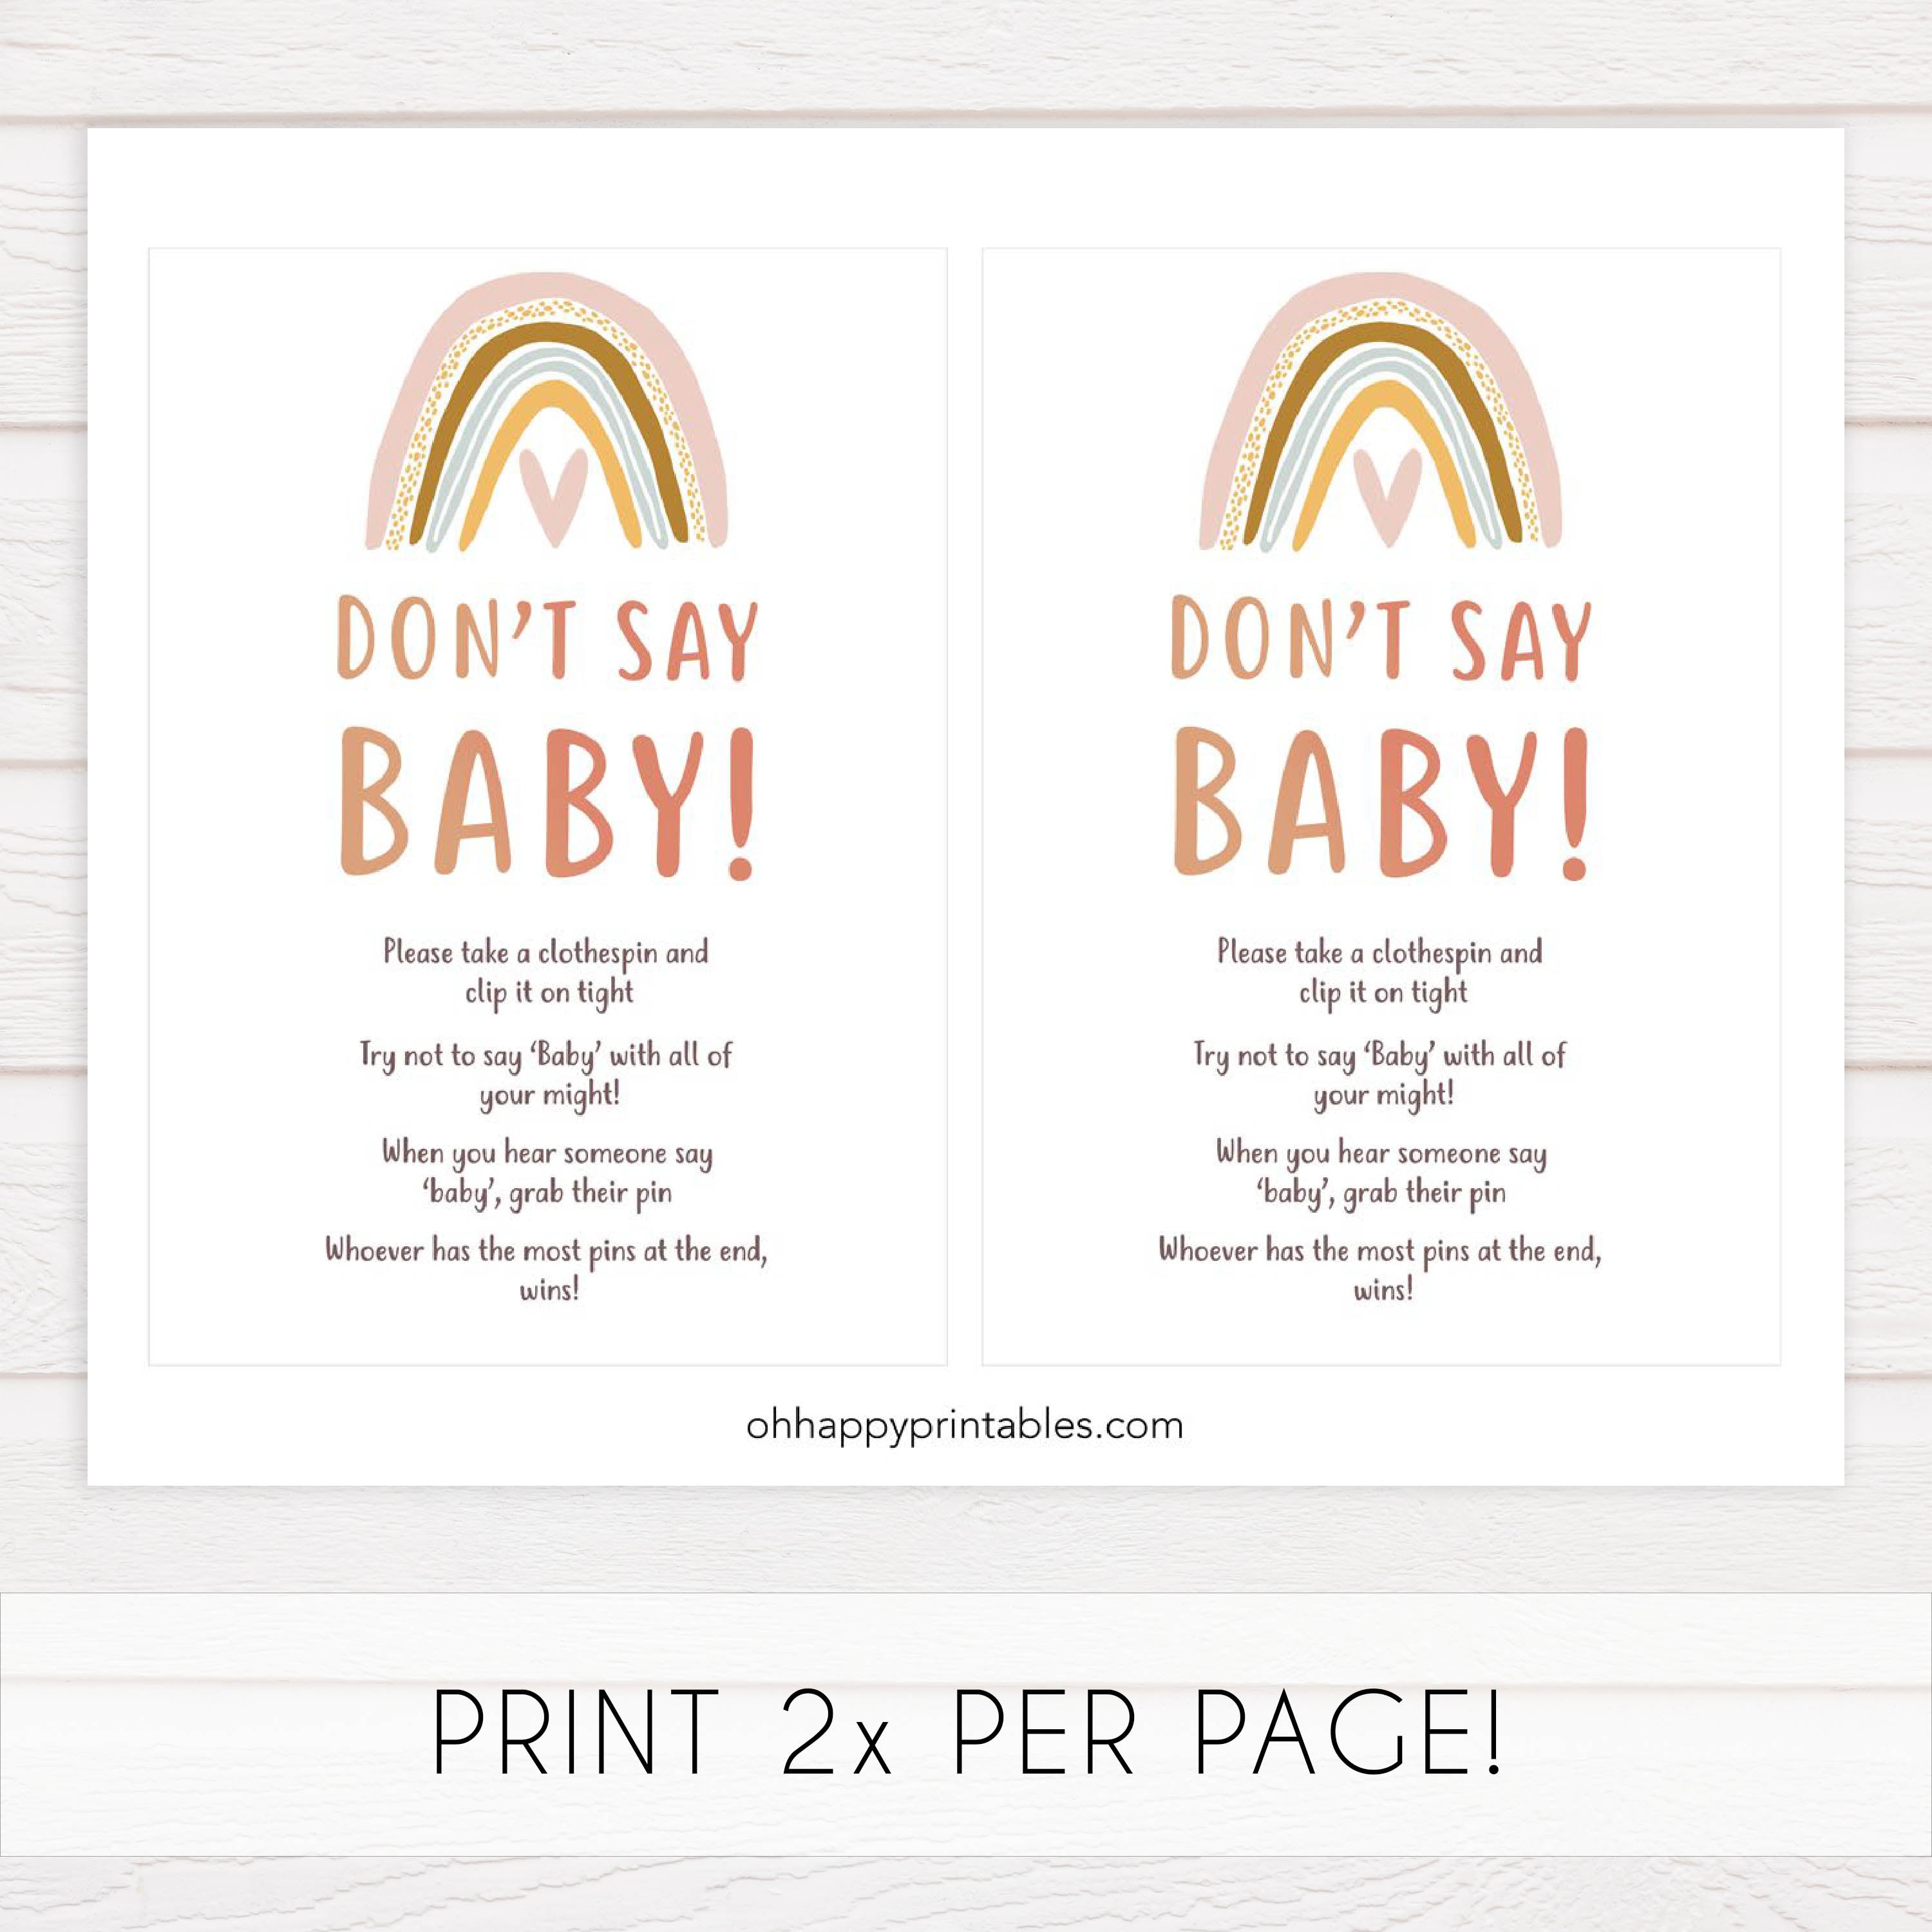 dont say baby game, Printable baby shower games, boho rainbow baby games, baby shower games, fun baby shower ideas, top baby shower ideas, boho rainbow baby shower, baby shower games, fun boho rainbow baby shower ideas